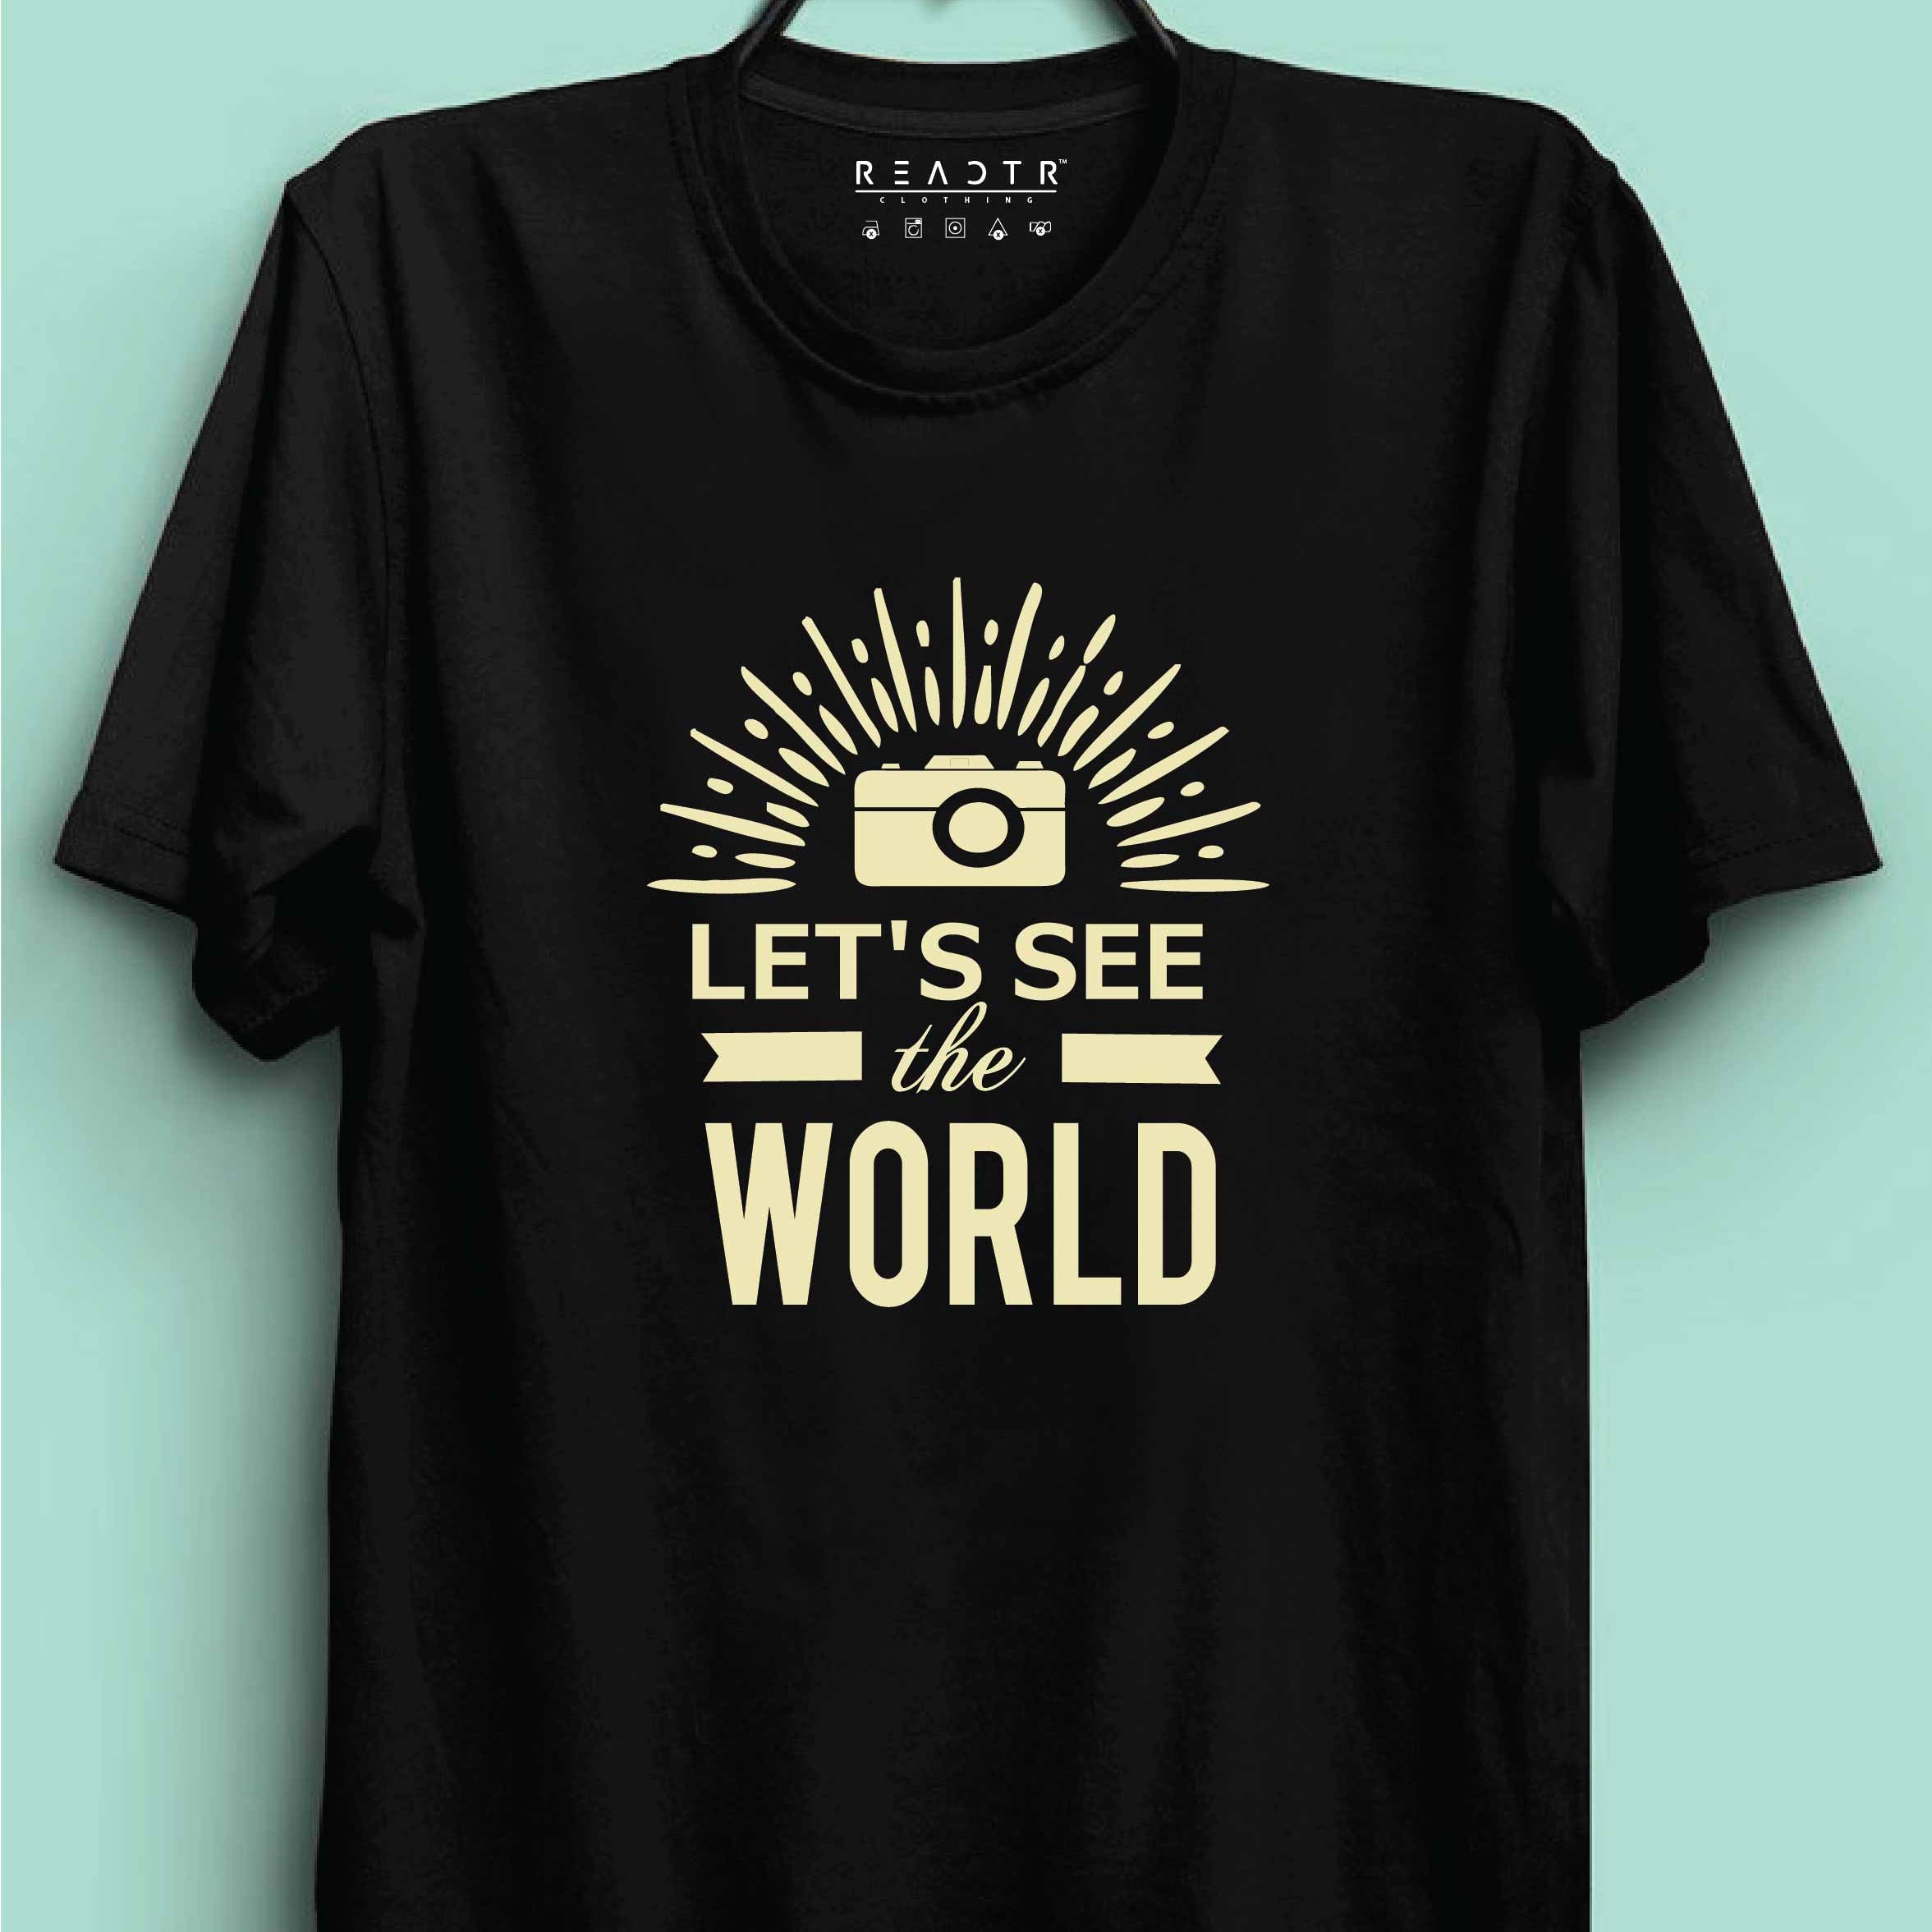 Lets See The World Reactr Tshirts For Men - Eyewearlabs